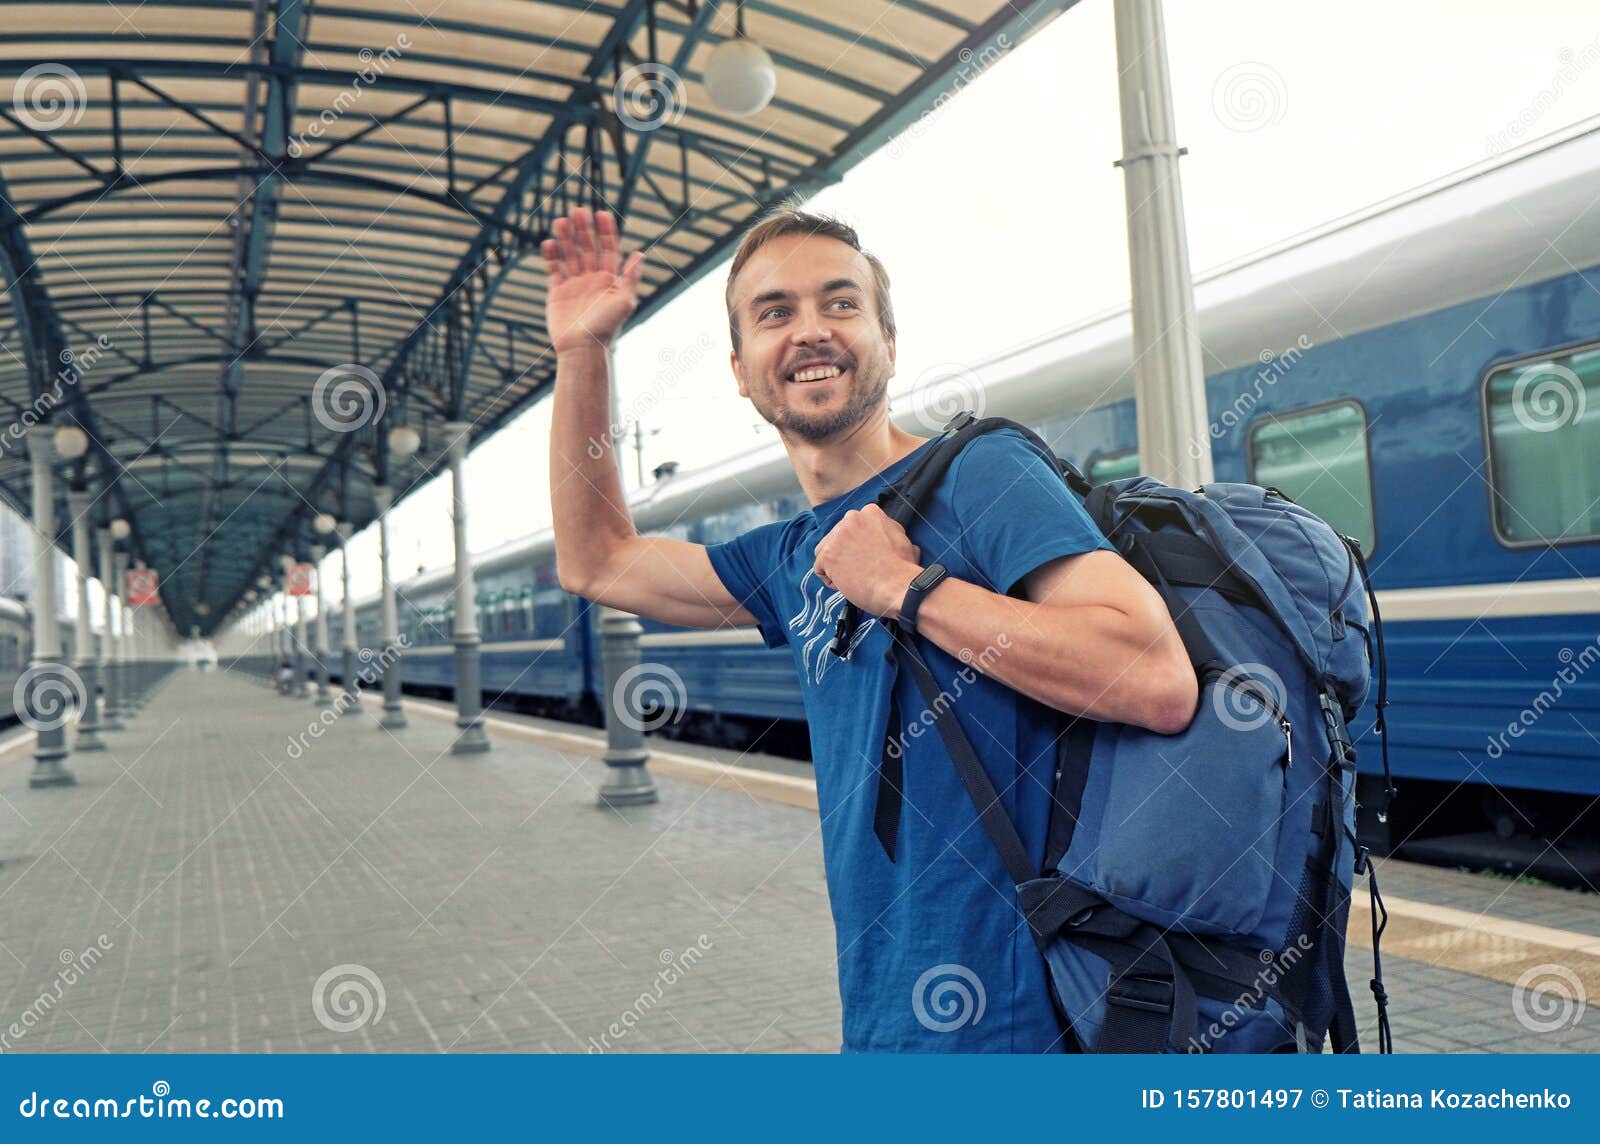 happy man tourist with backpack stand on railway station platform, greeting friends or saying goodbye, waving his hand. travel by